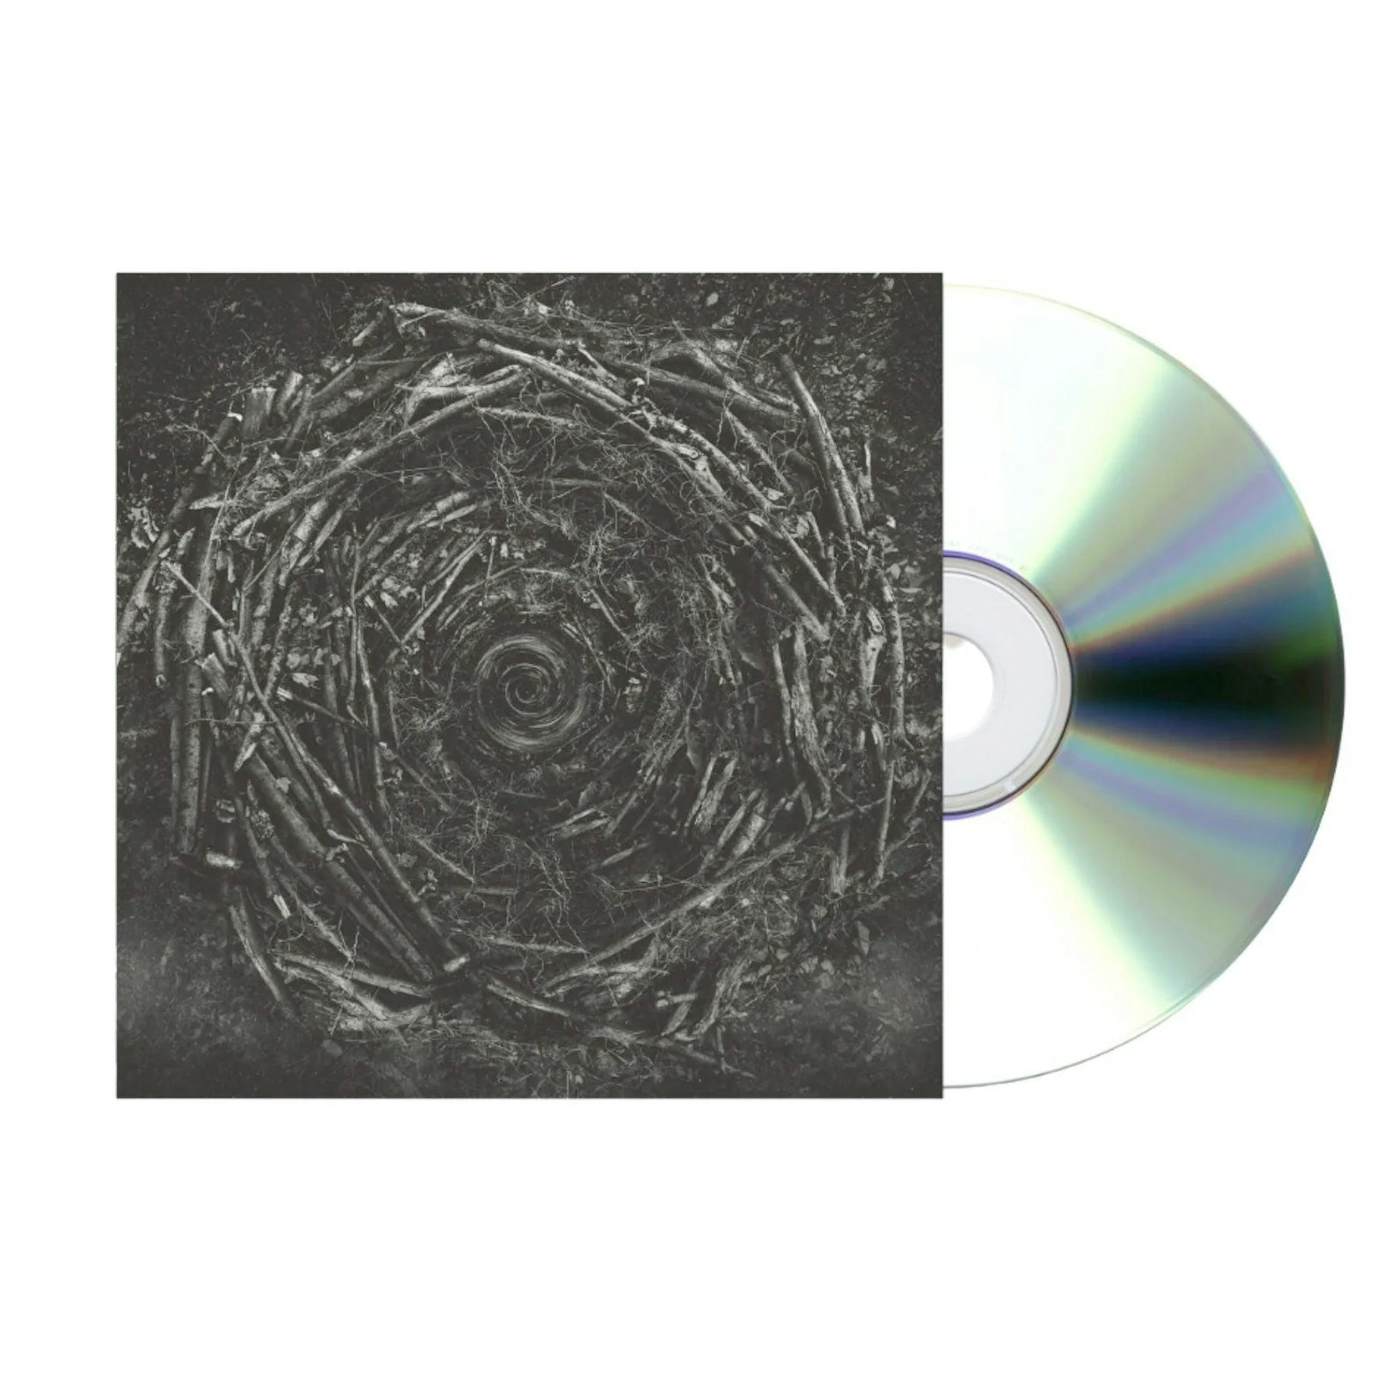 The Contortionist "Clairvoyant" CD